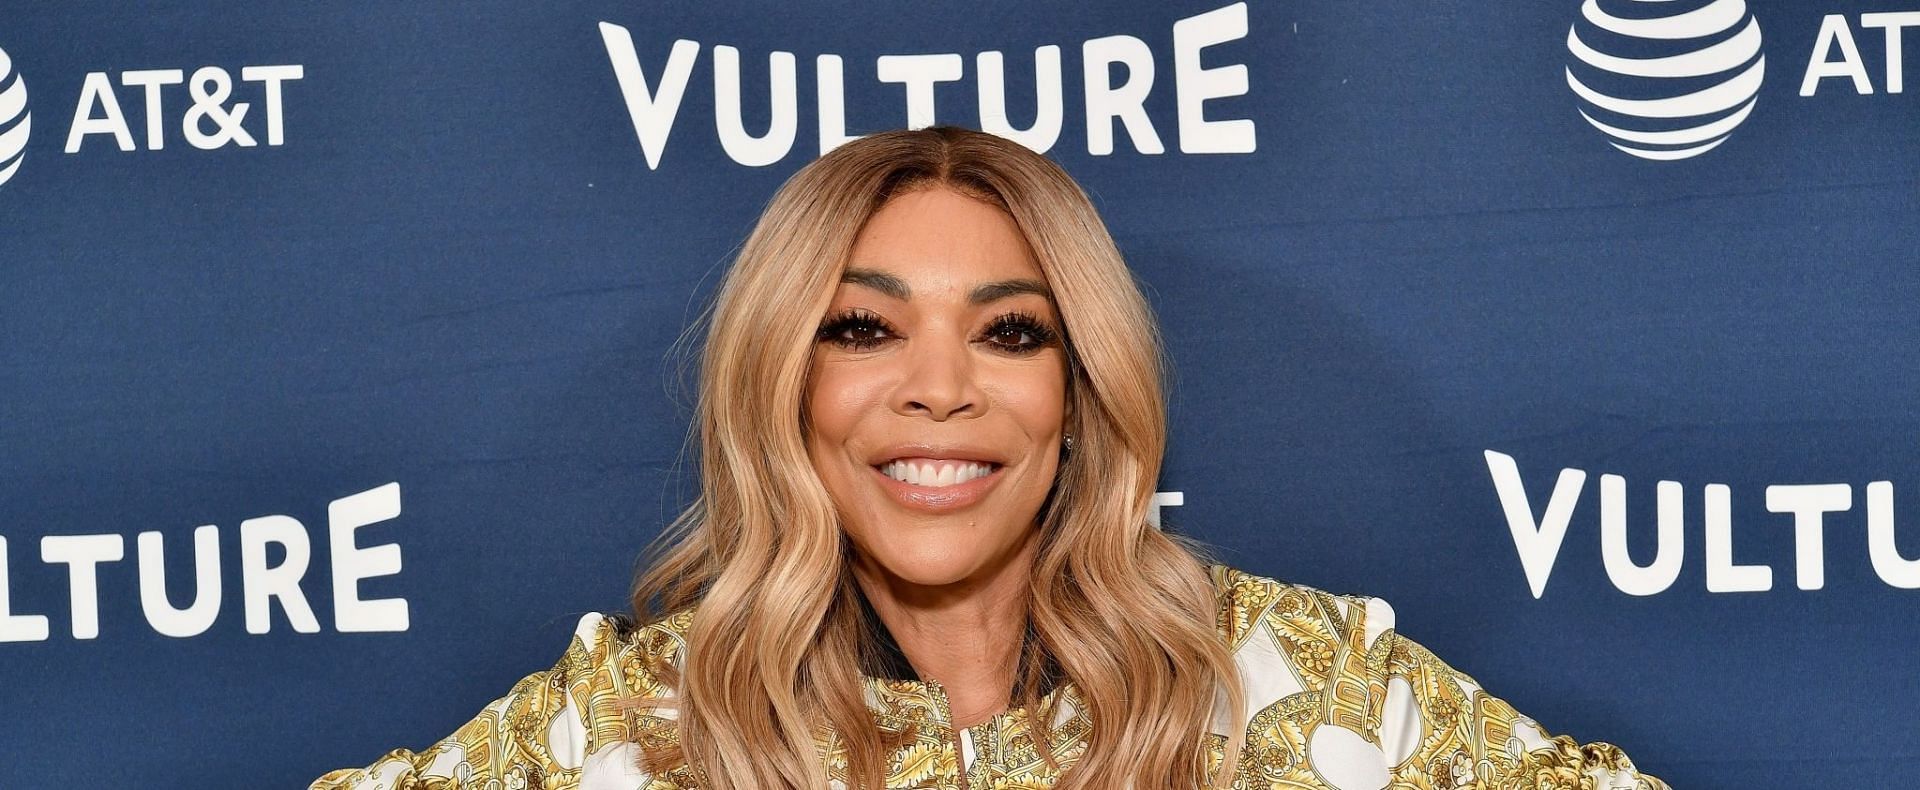 Wendy Williams has been suffering several health issues since last year (Image via Dia Dipasupil/Getty Images)